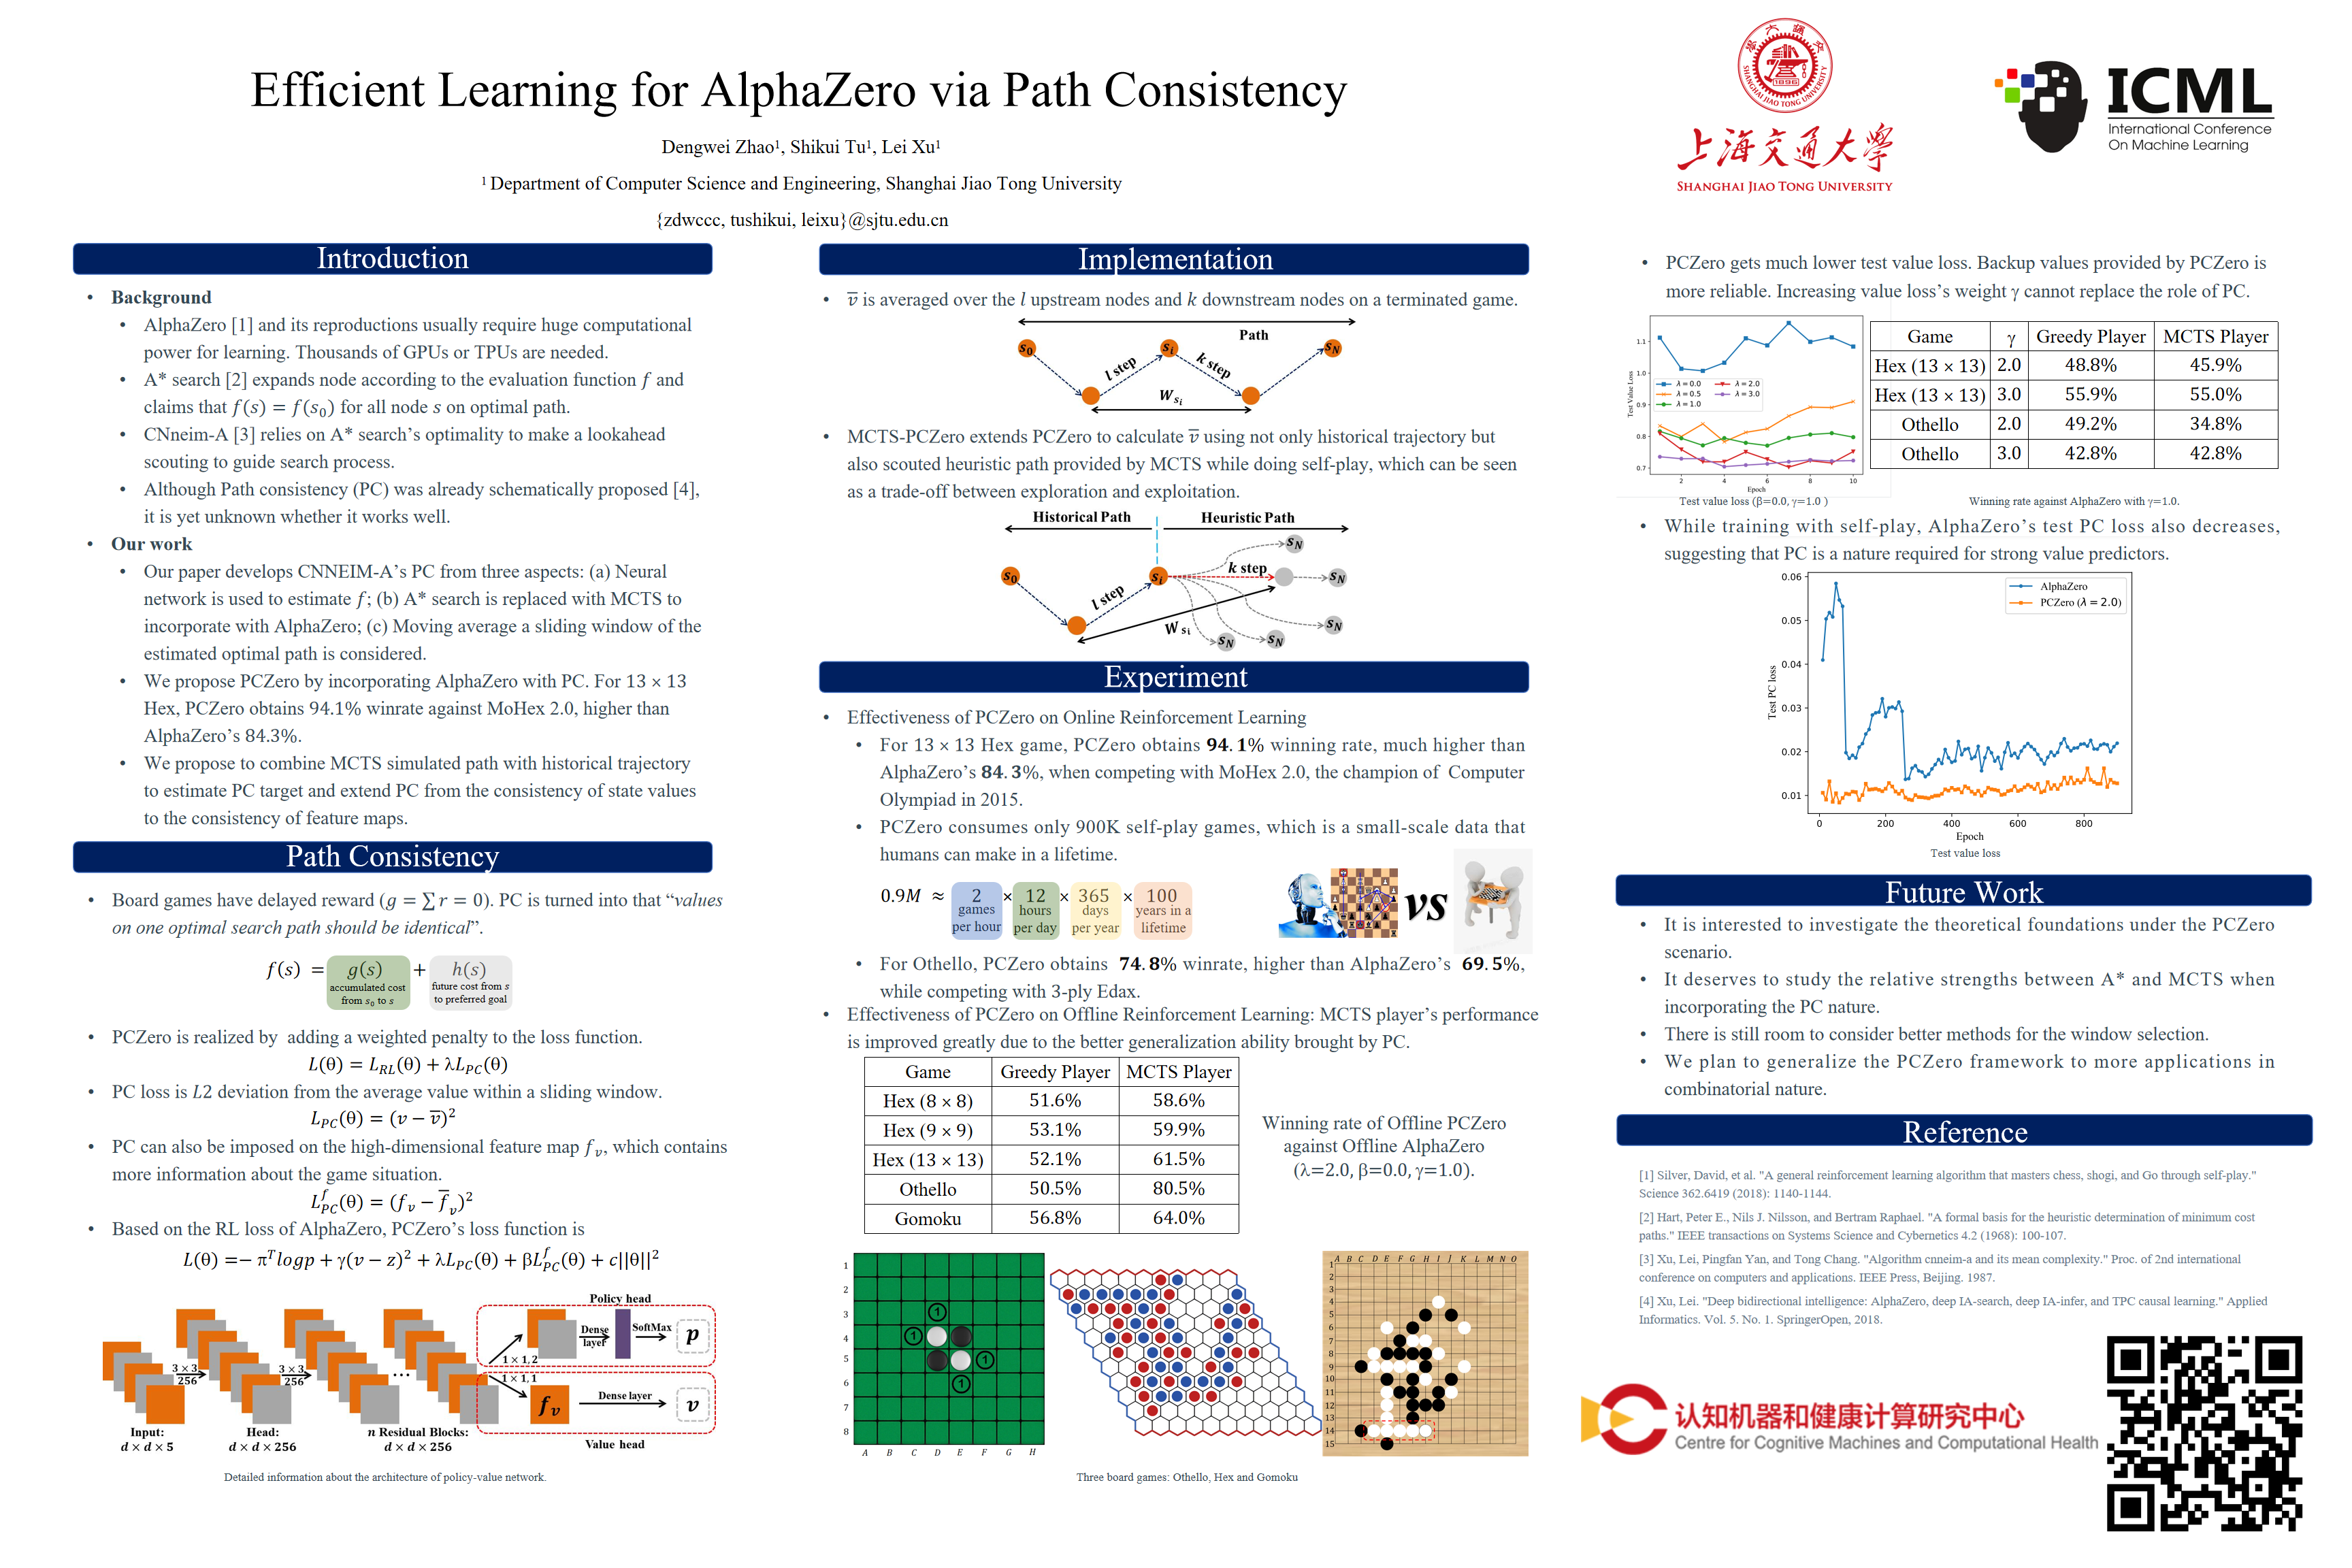 Efficient Learning for AlphaZero via Path Consistency Poster